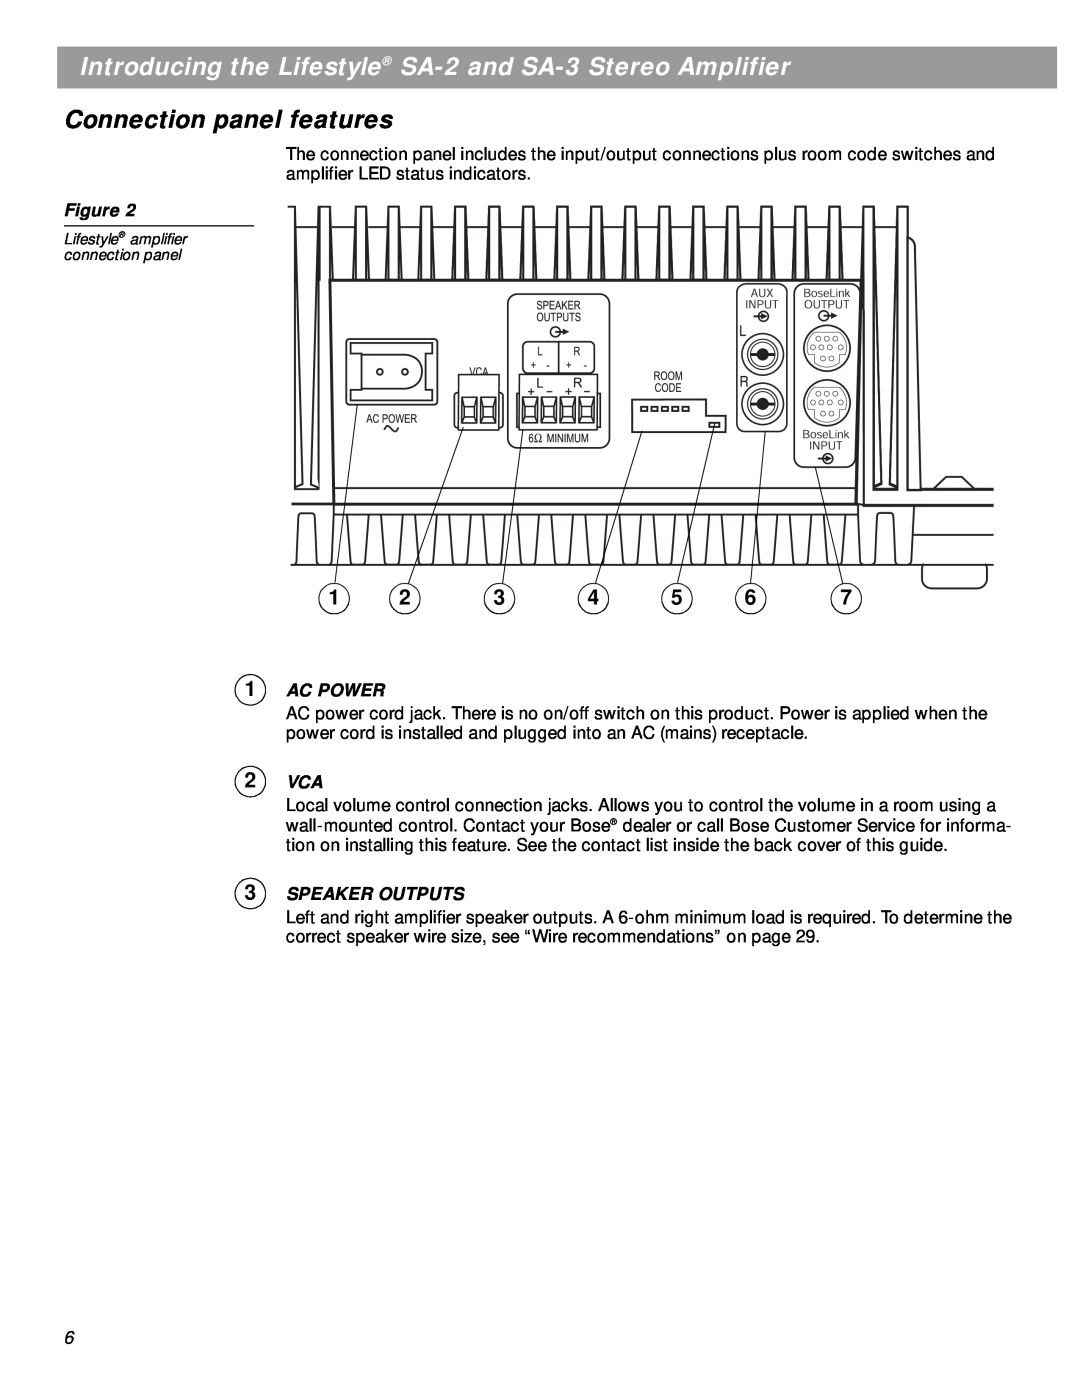 Bose SA-3 manual Connection panel features, 1AC POWER, 2VCA, 3SPEAKER OUTPUTS 